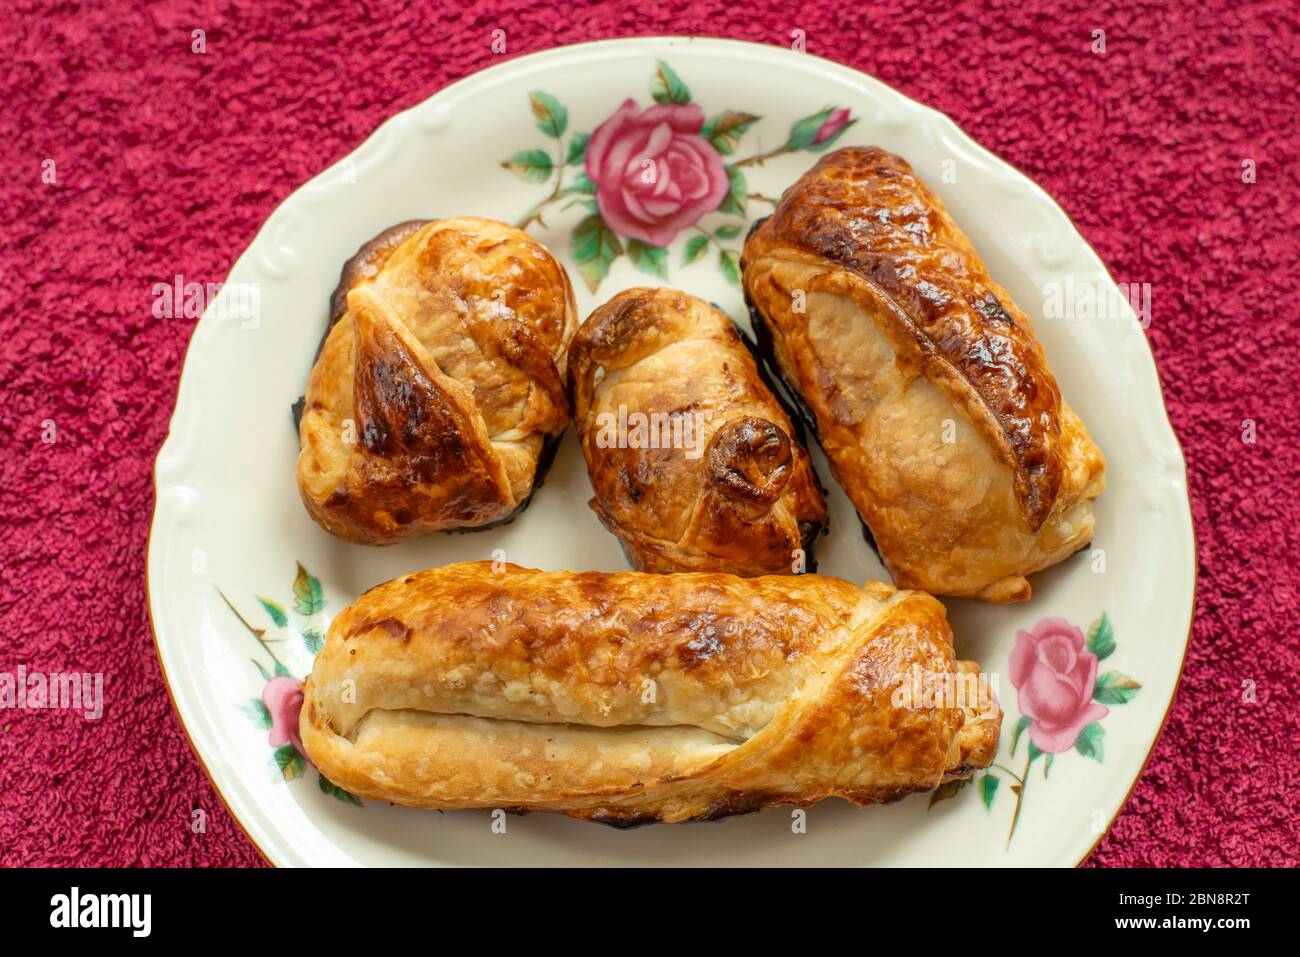 Four nicely browned homemade pastries (pains au chocolat) Stock Photo